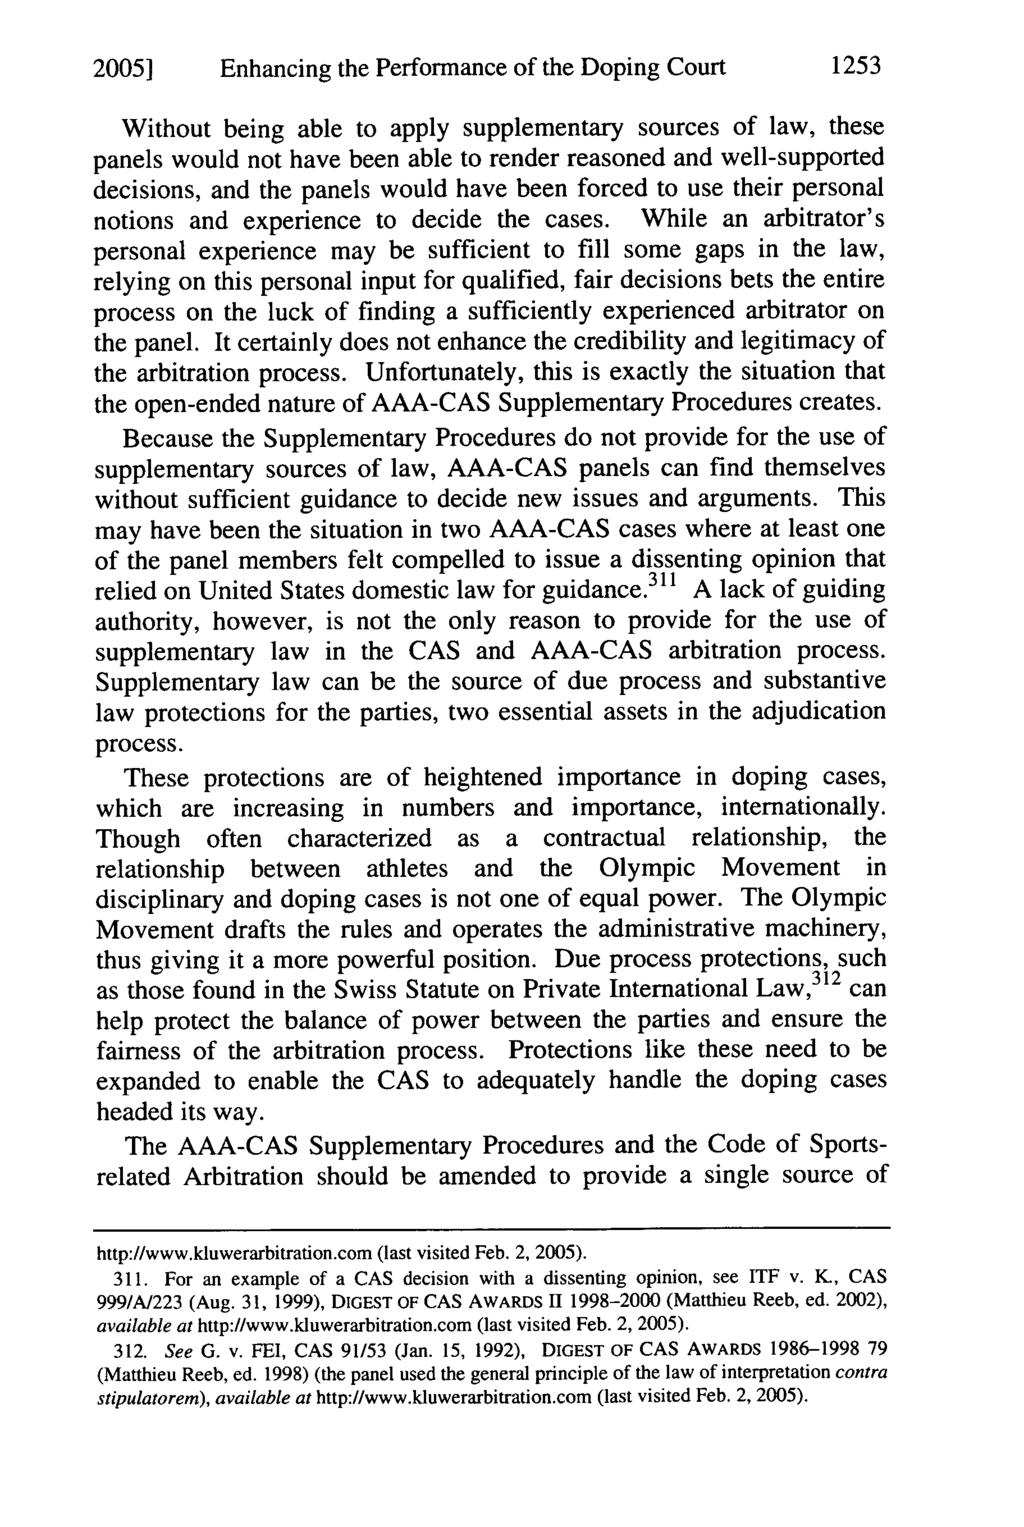 20051 Enhancing the Performance of the Doping Court 1253 Without being able to apply supplementary sources of law, these panels would not have been able to render reasoned and well-supported